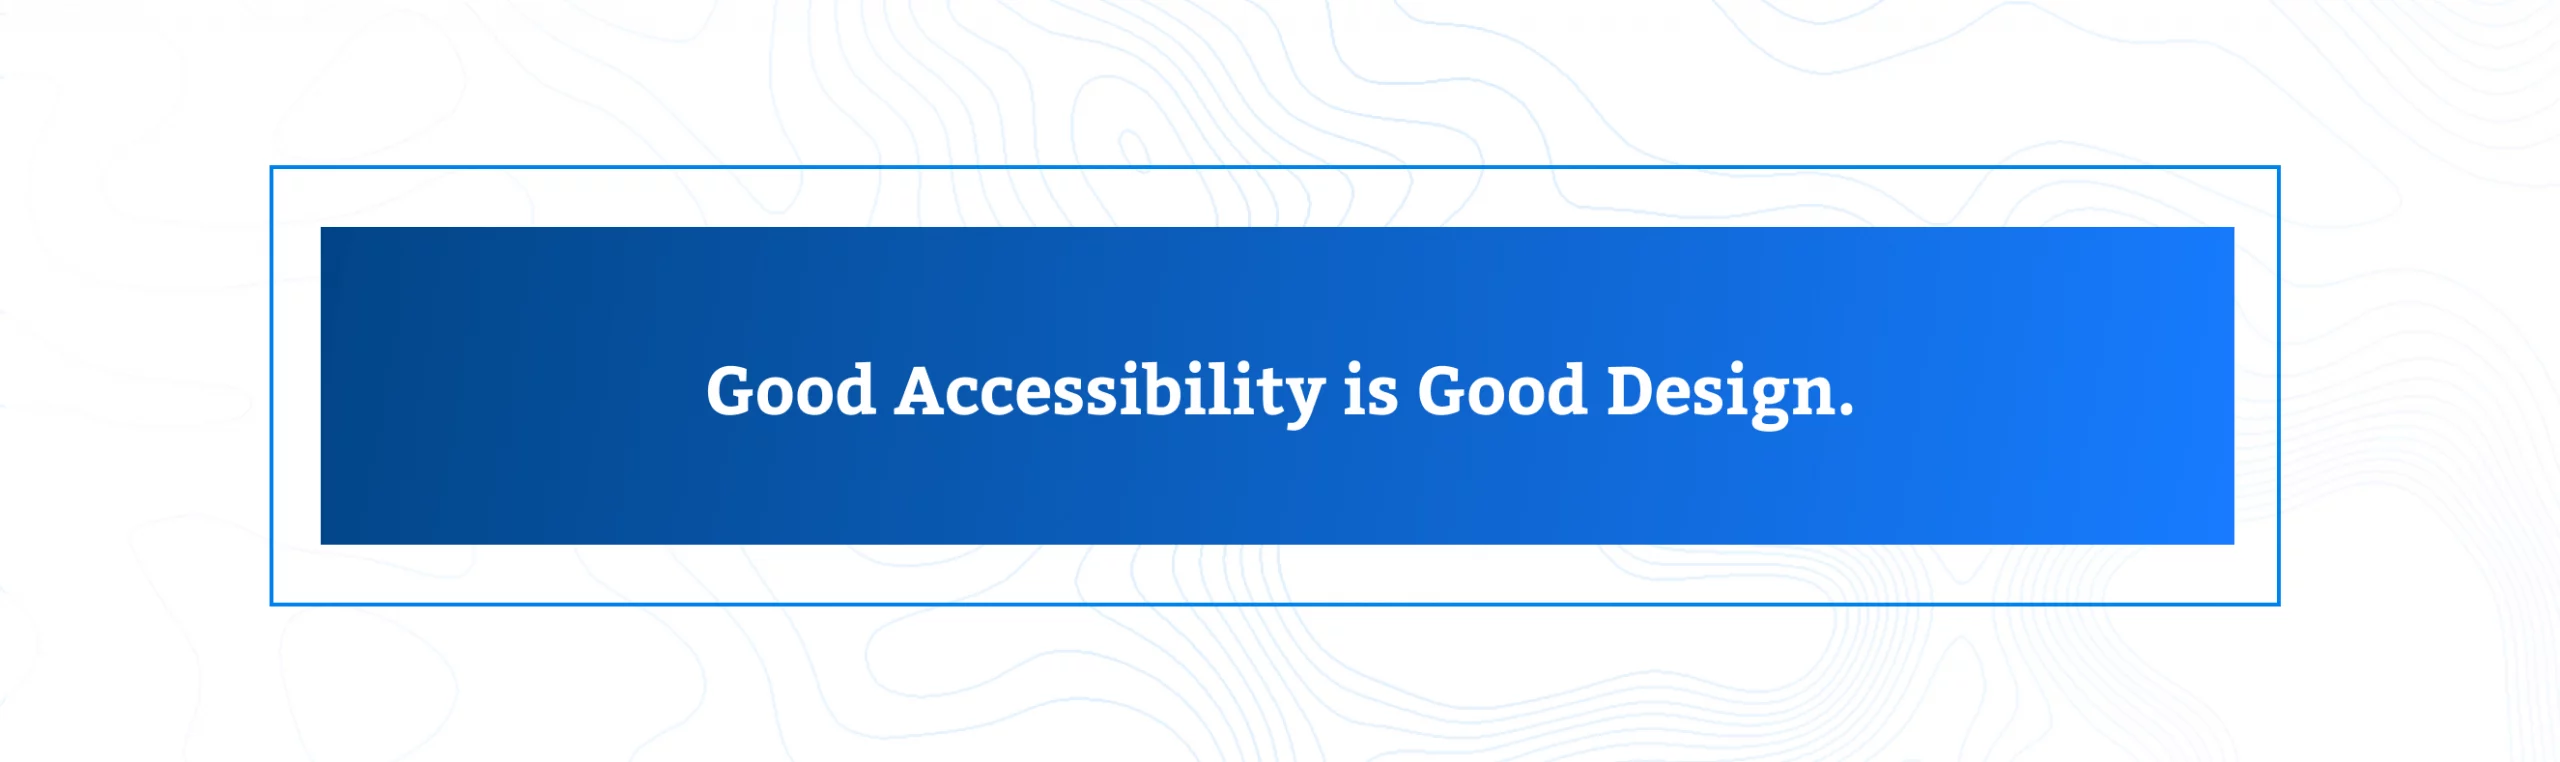 Good Accessibility is Good Design